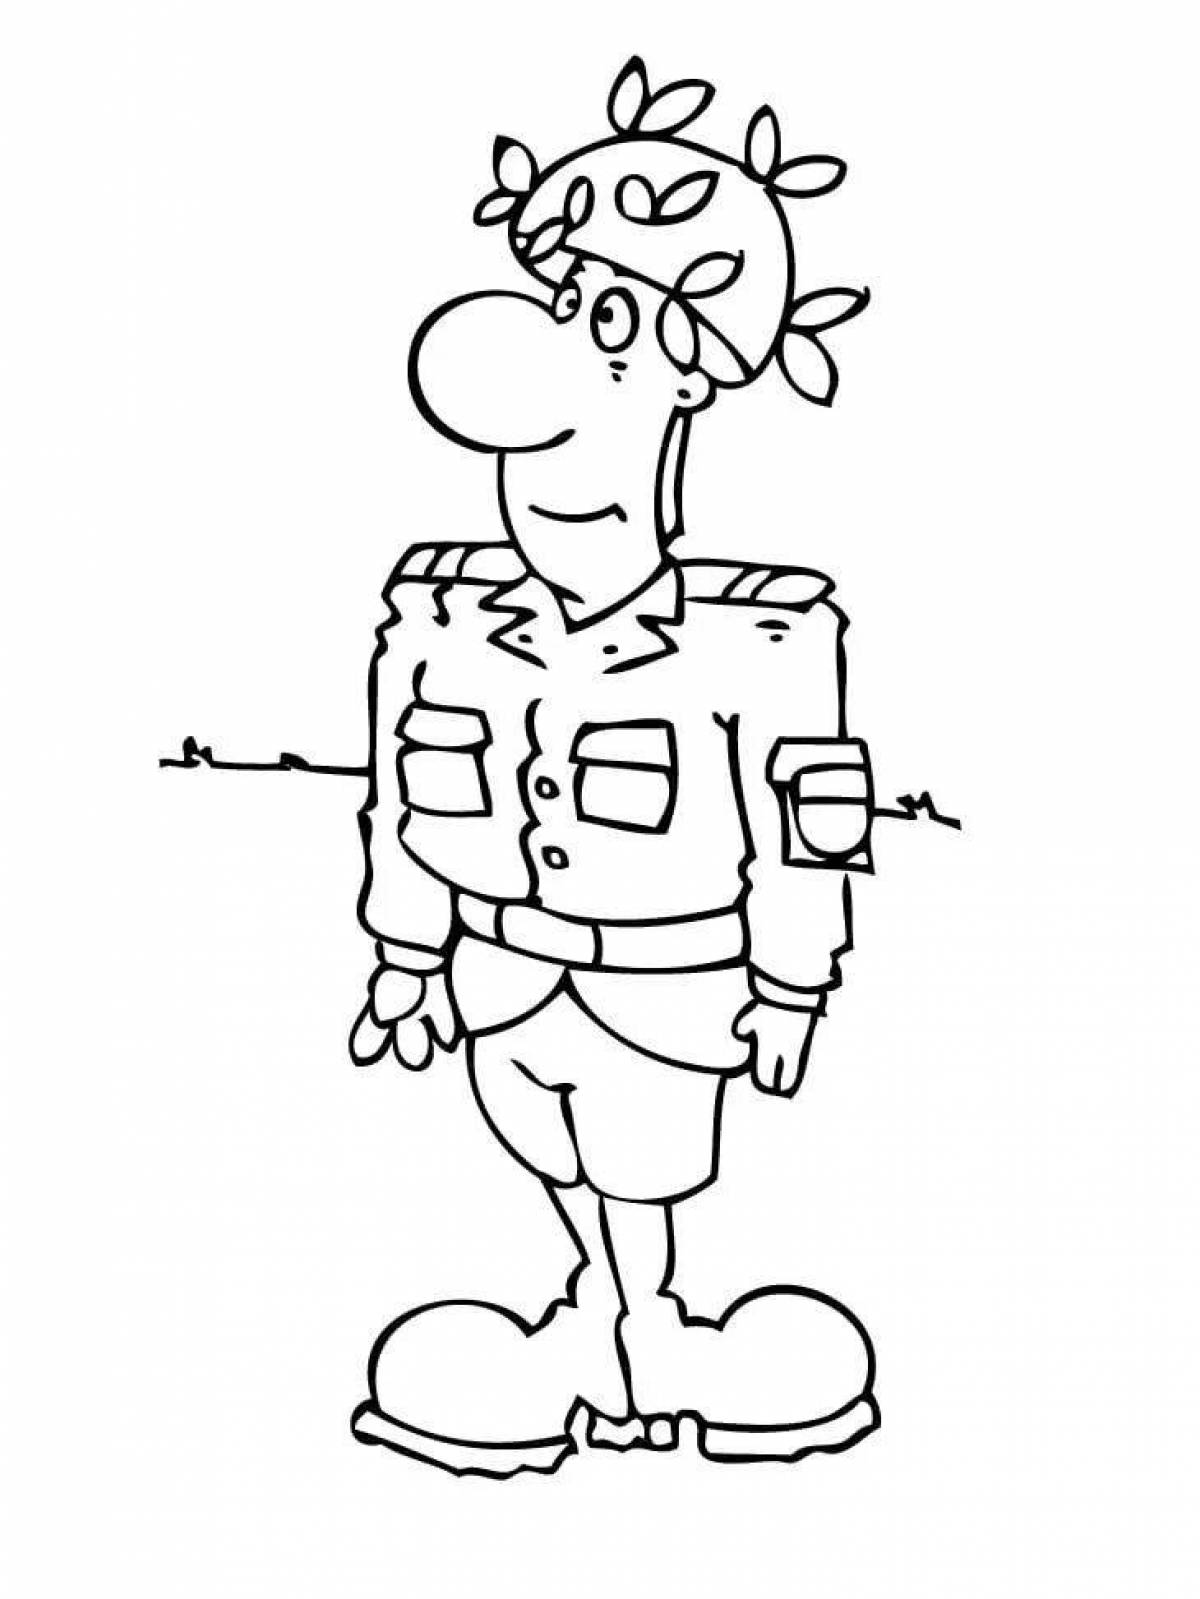 Fine Soldier coloring page February 23